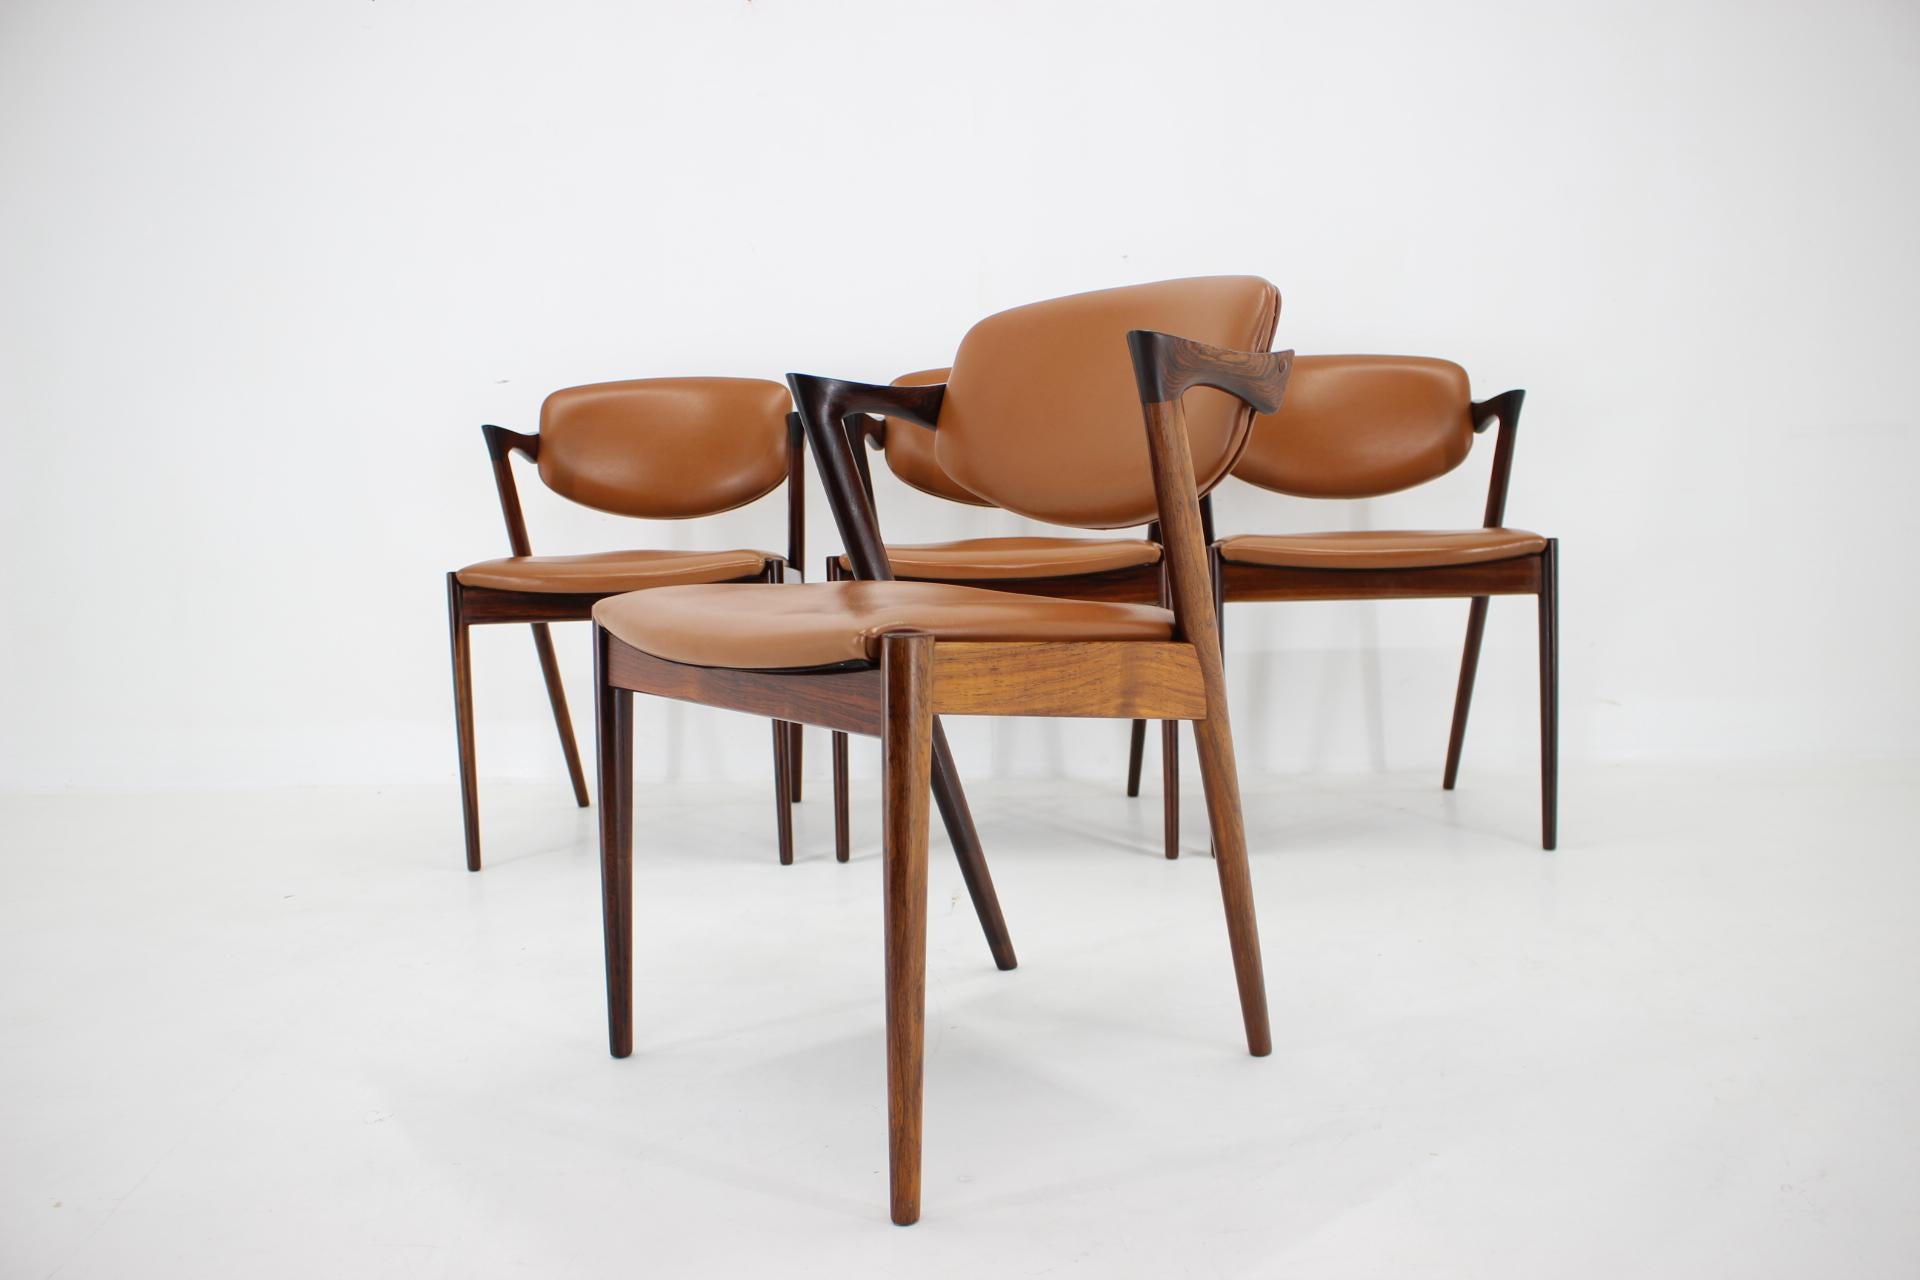 1960s Kai Kristiansen Model 42 Dining Chairs in Palisander, set of 4 In Good Condition For Sale In Praha, CZ